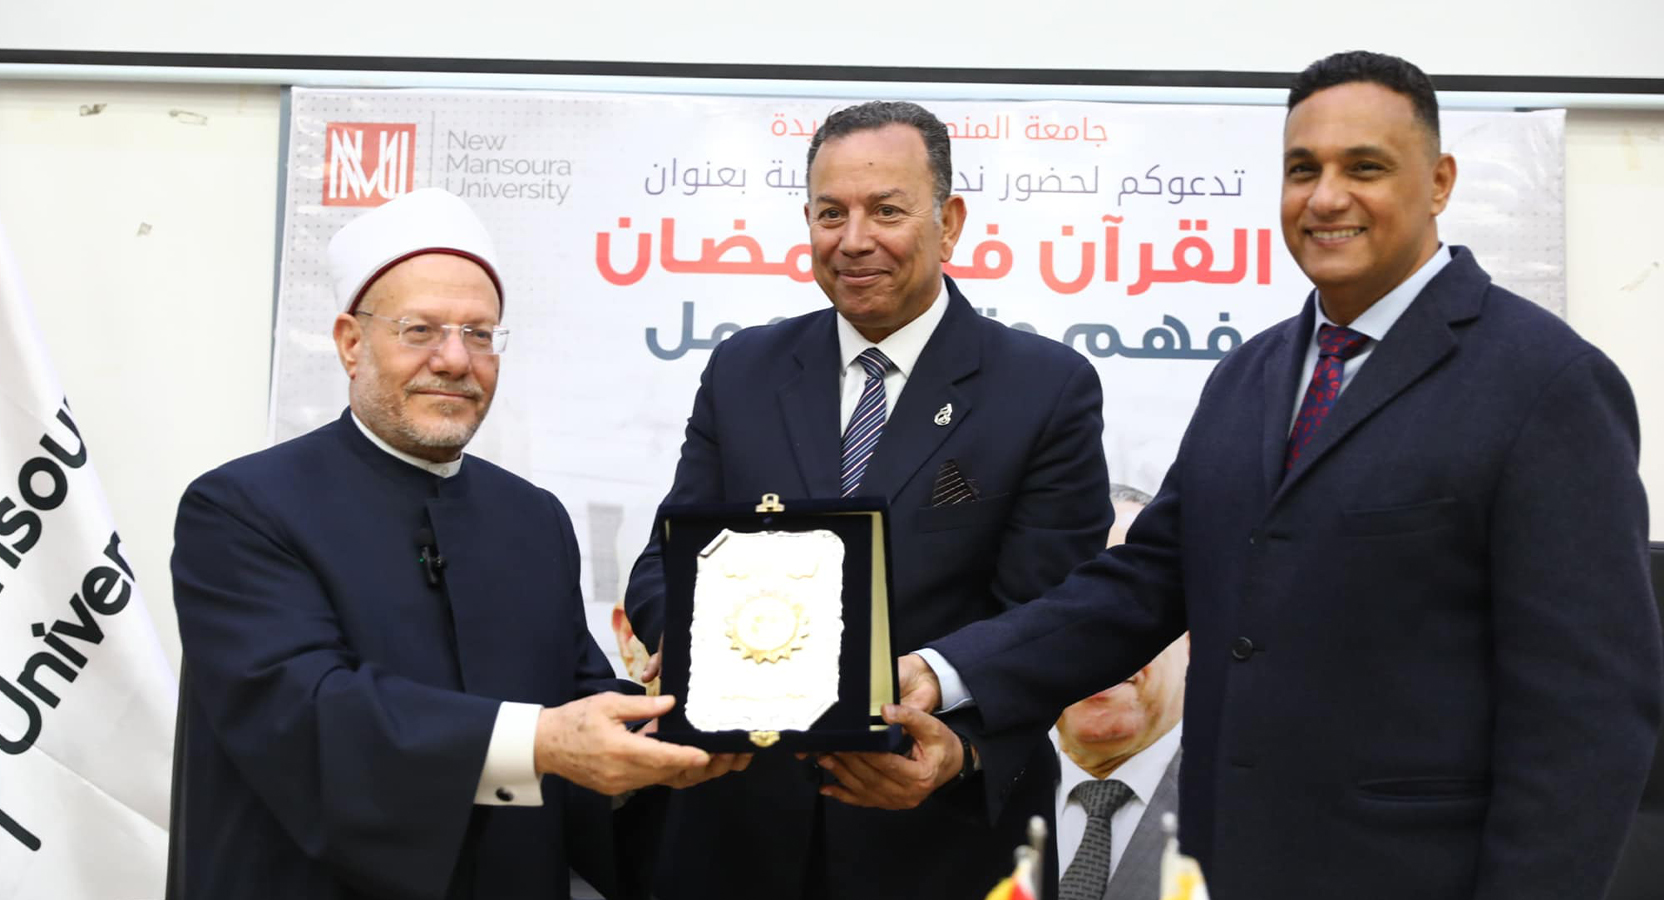 “The Qur’an in Ramadan: Understanding, Meditation, and Action” A scientific symposium by His Eminence the Mufti of Egypt at New Mansoura University